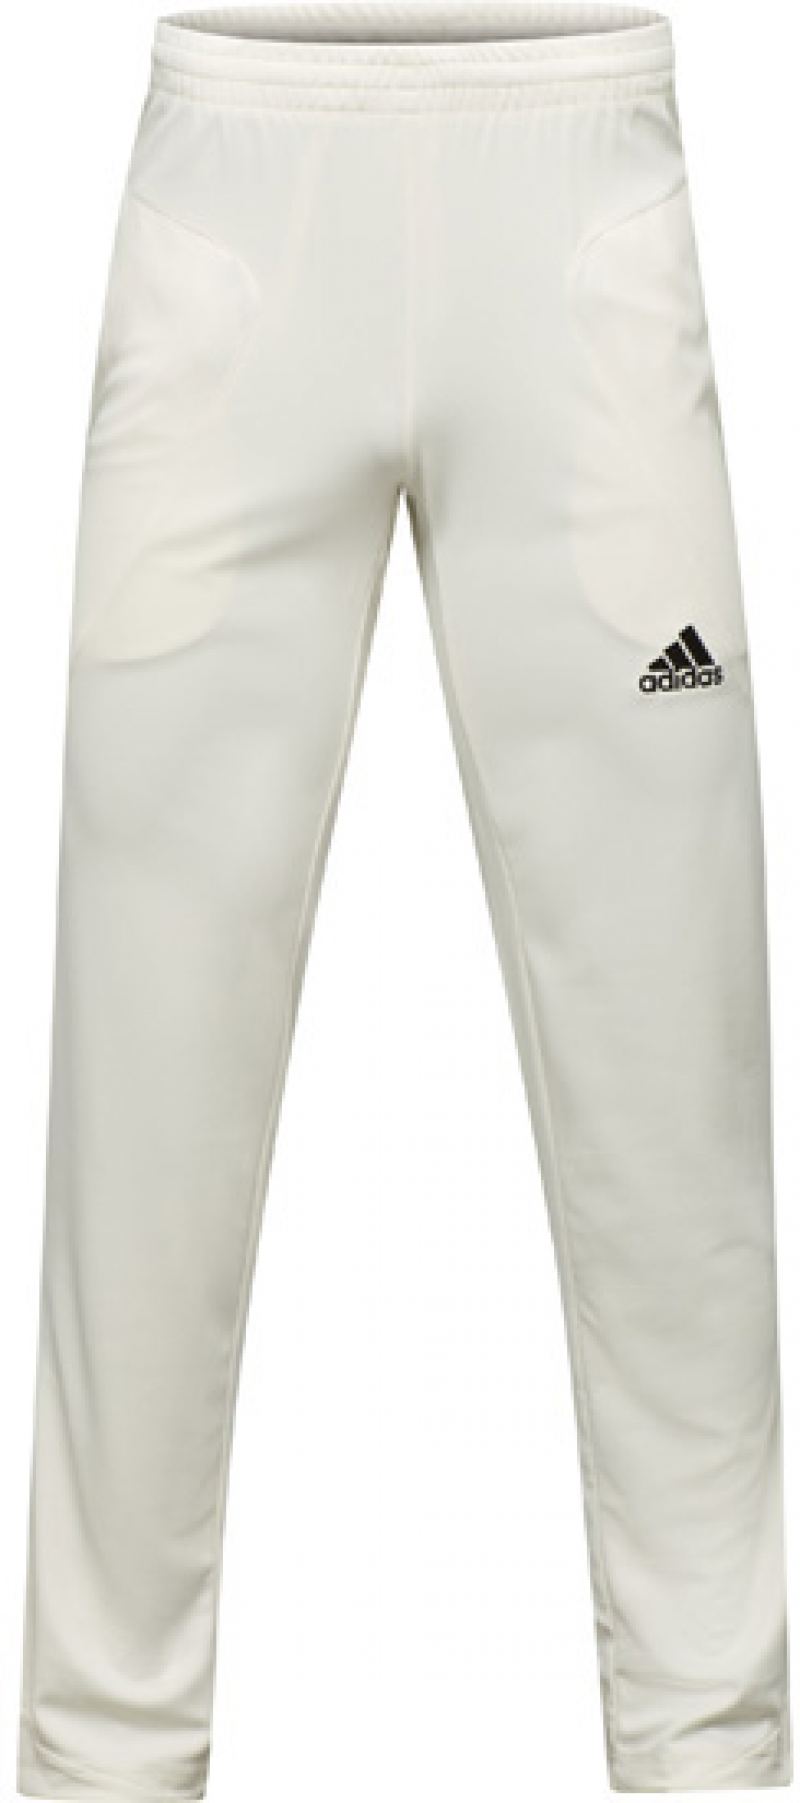 adidas cricket trousers